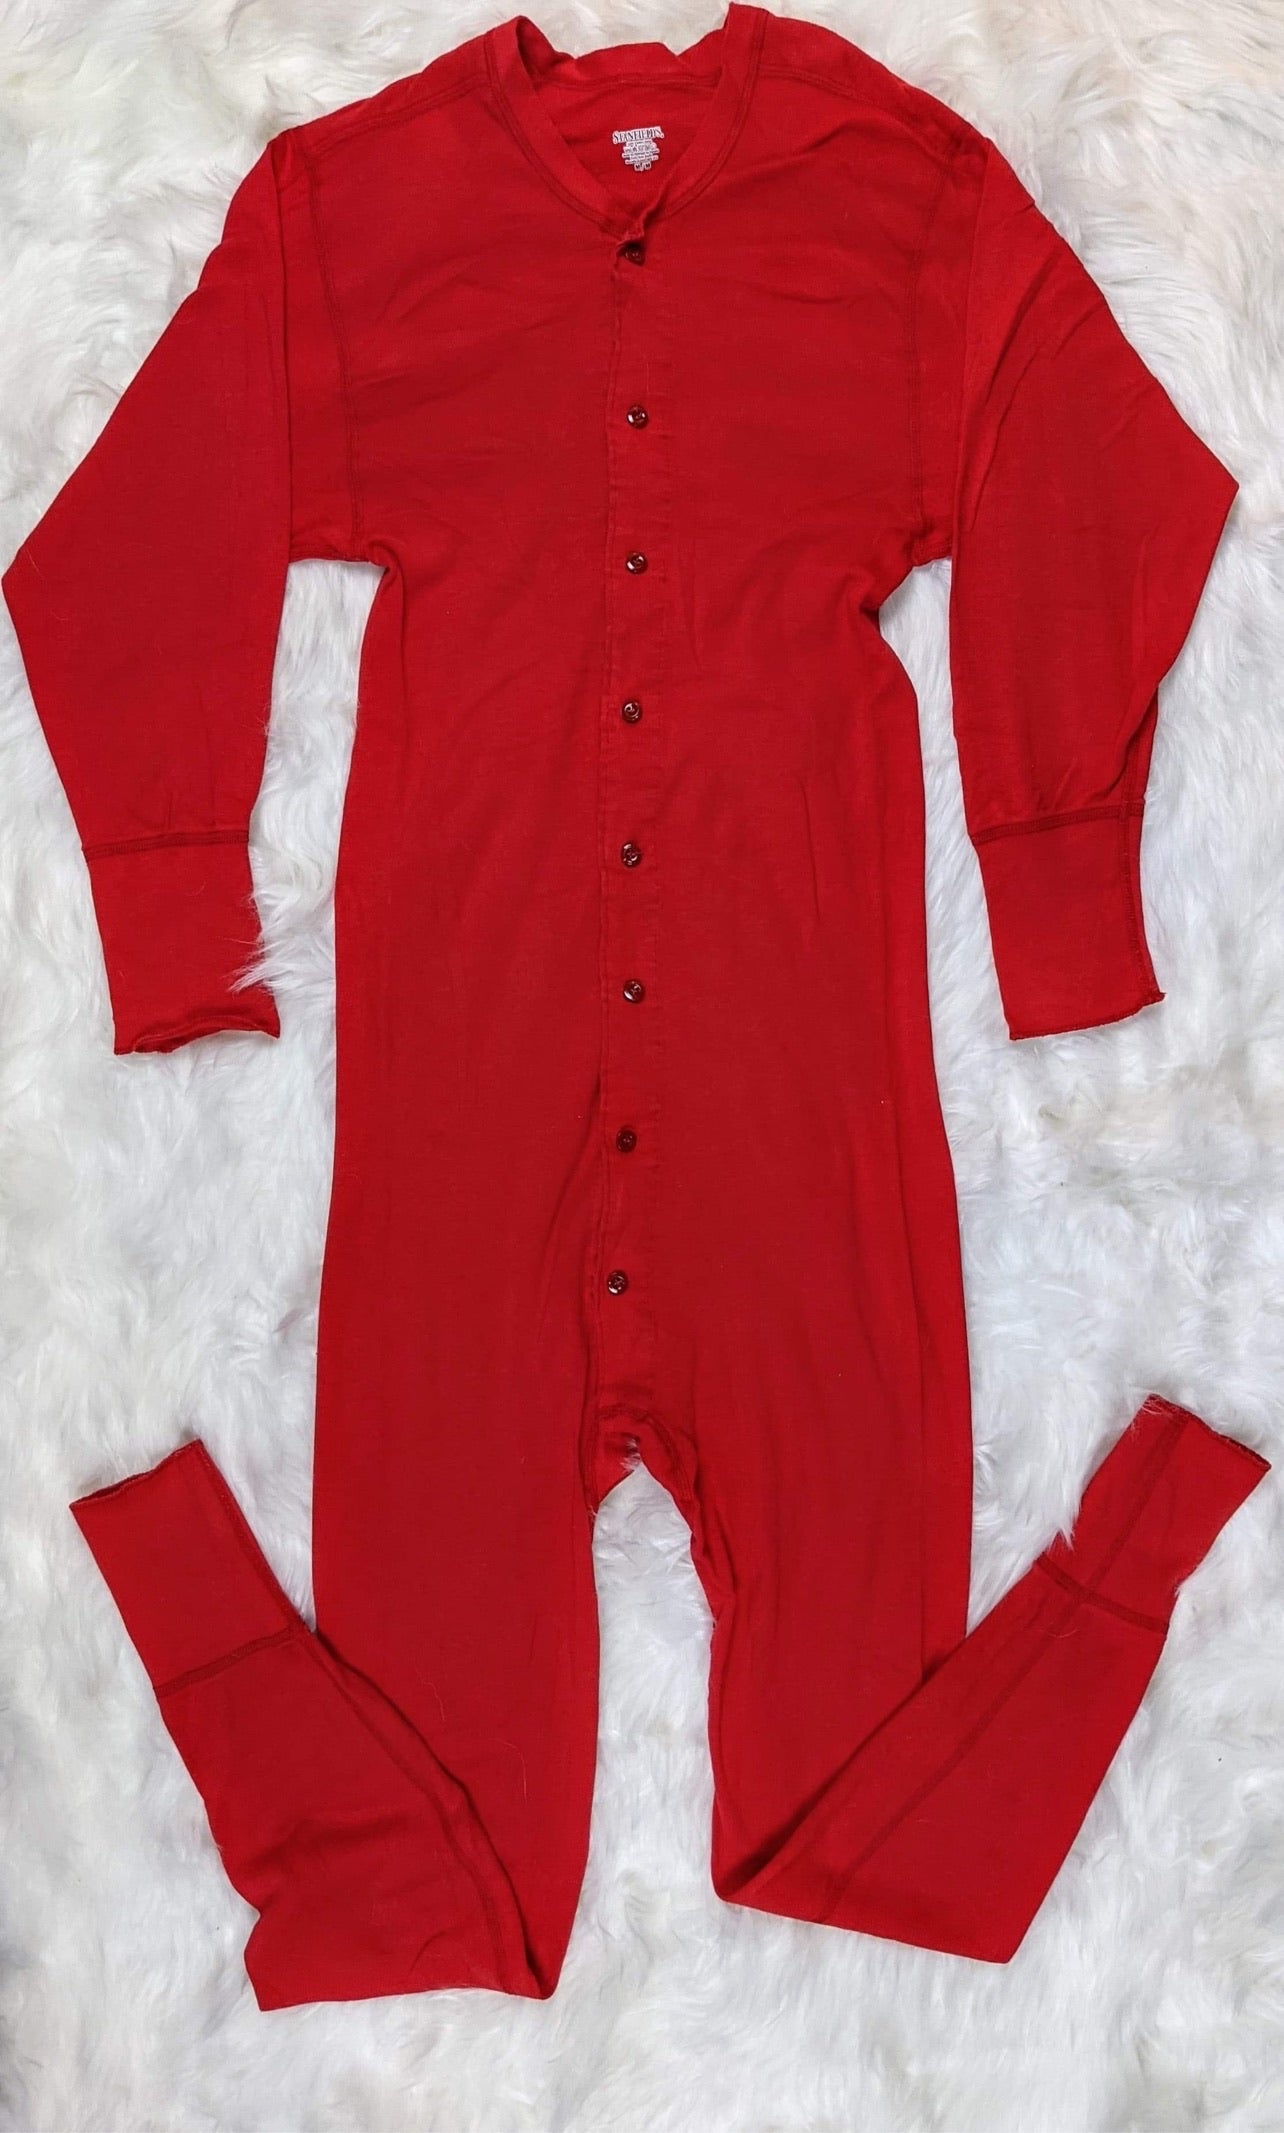 stanfield red vintage retro longjohns thermal underwear undergarments mens 